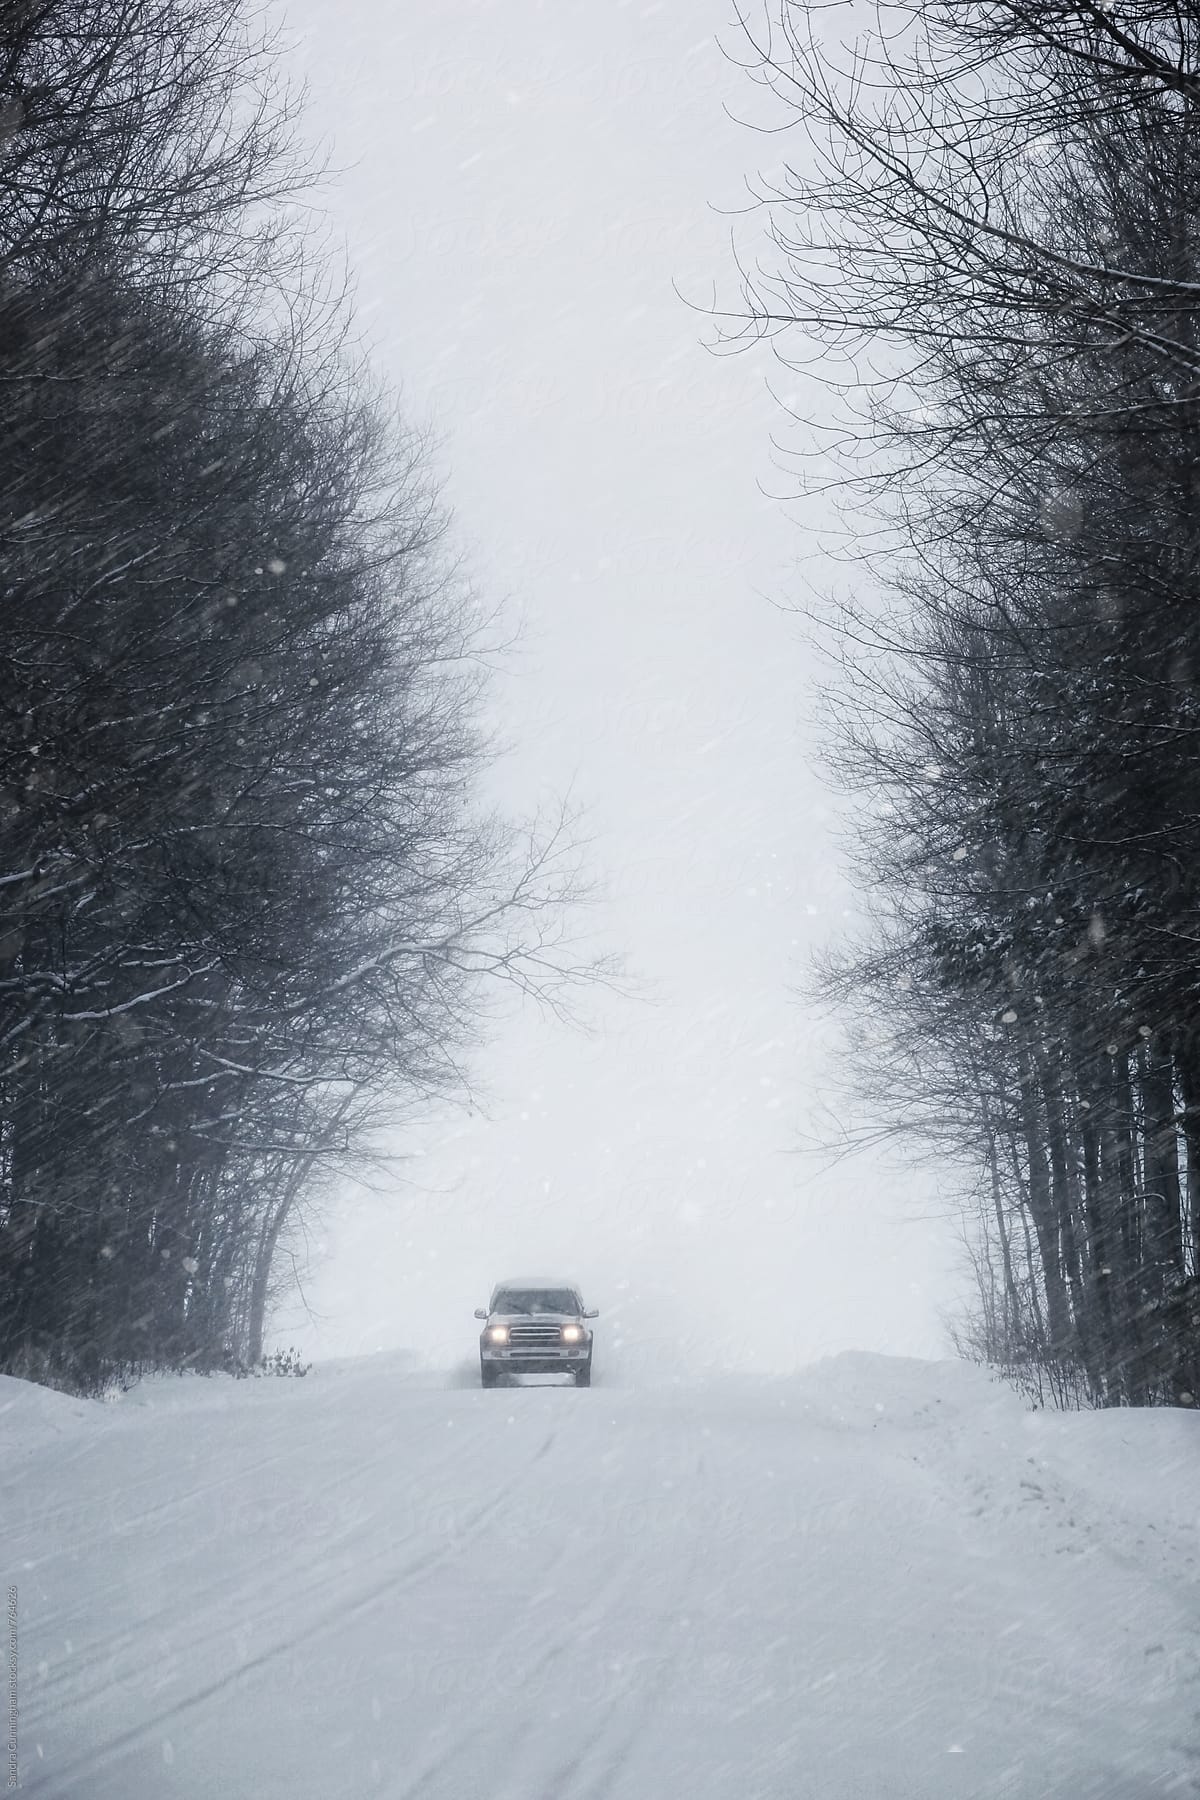 Truck approaching on snow covered road